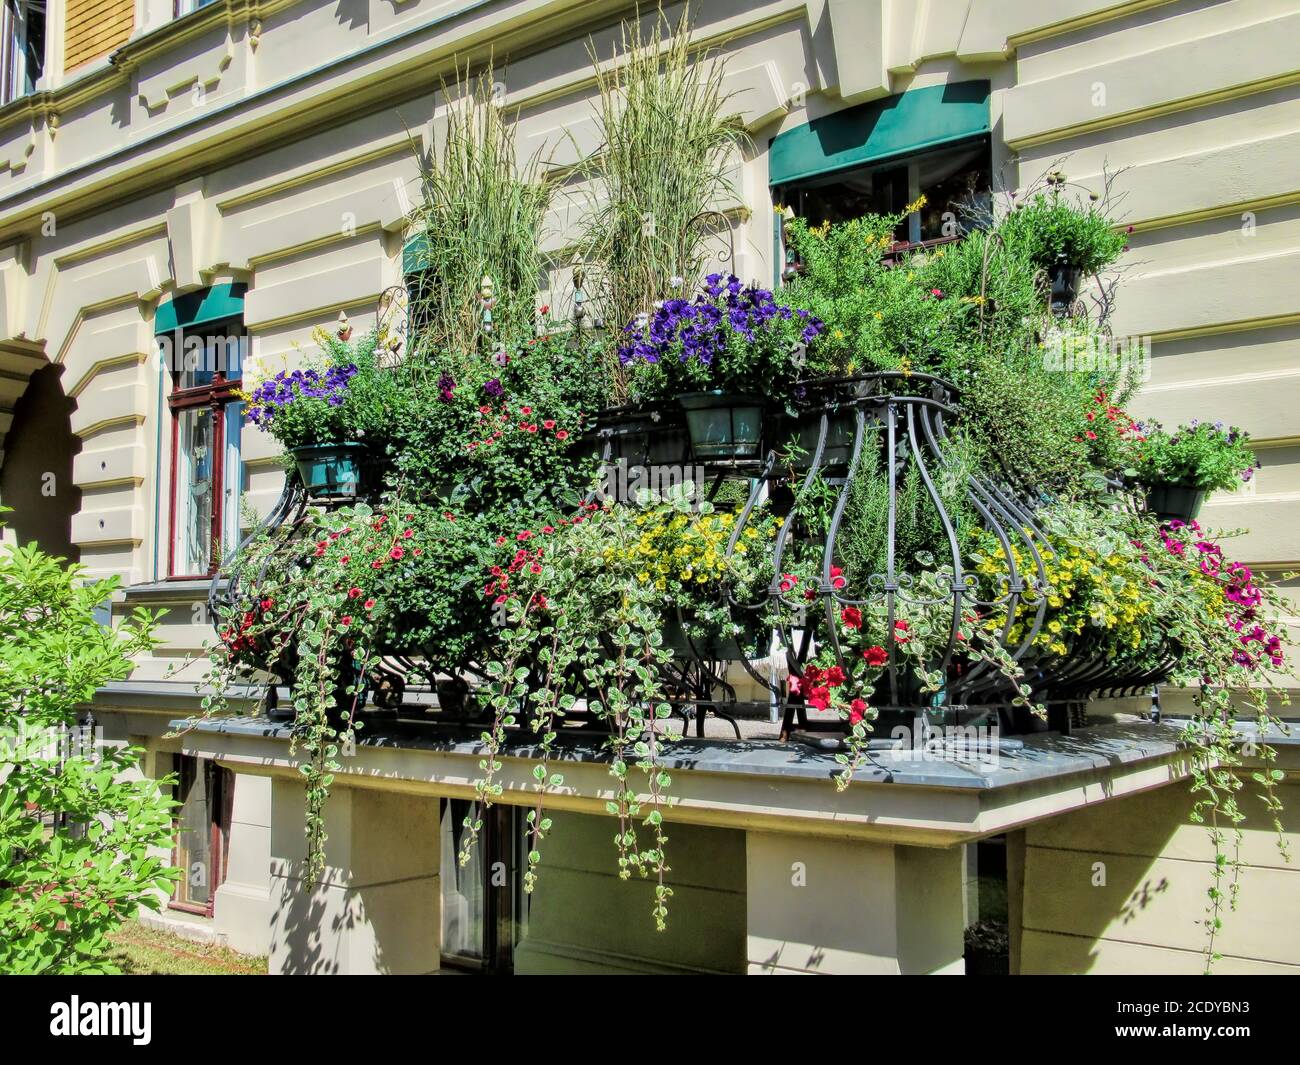 Berlin, Germany - balcony with lots of flowers on an old house Stock Photo